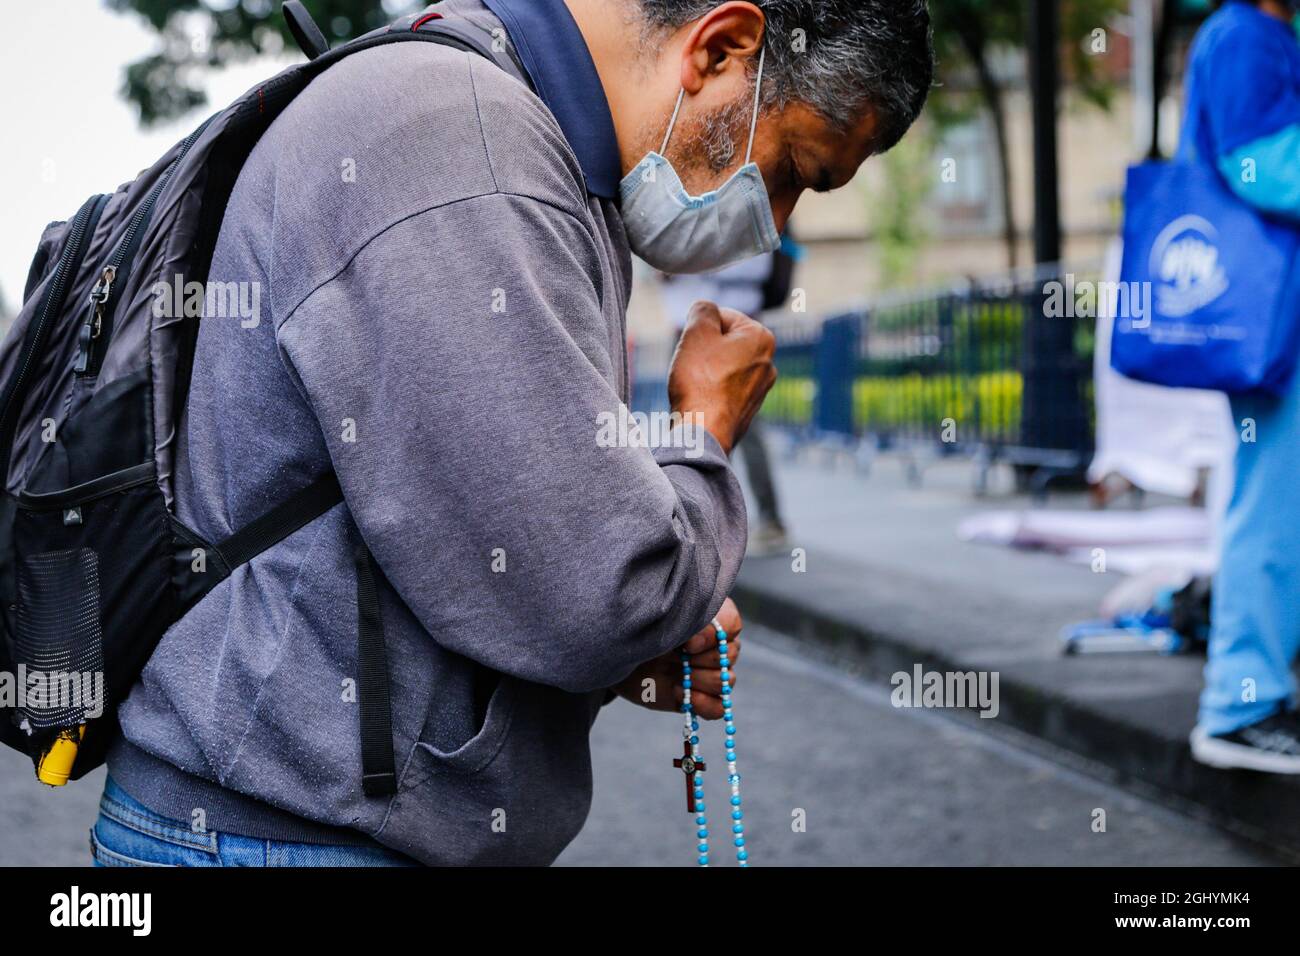 Mexico City, Mexico. 06th Sep, 2021. A protester prays on his knees outside of the Supreme Court of Justice, during the demonstration. Pro-life protesters in a session demonstrated against the decriminalization of abortion in Coahuila and Sinaloa during the first stage of pregnancy. The favourable decision could lead to decriminalization throughout Mexico. (Photo by Guillermo Diaz/SOPA Images/Sipa USA) Credit: Sipa USA/Alamy Live News Stock Photo